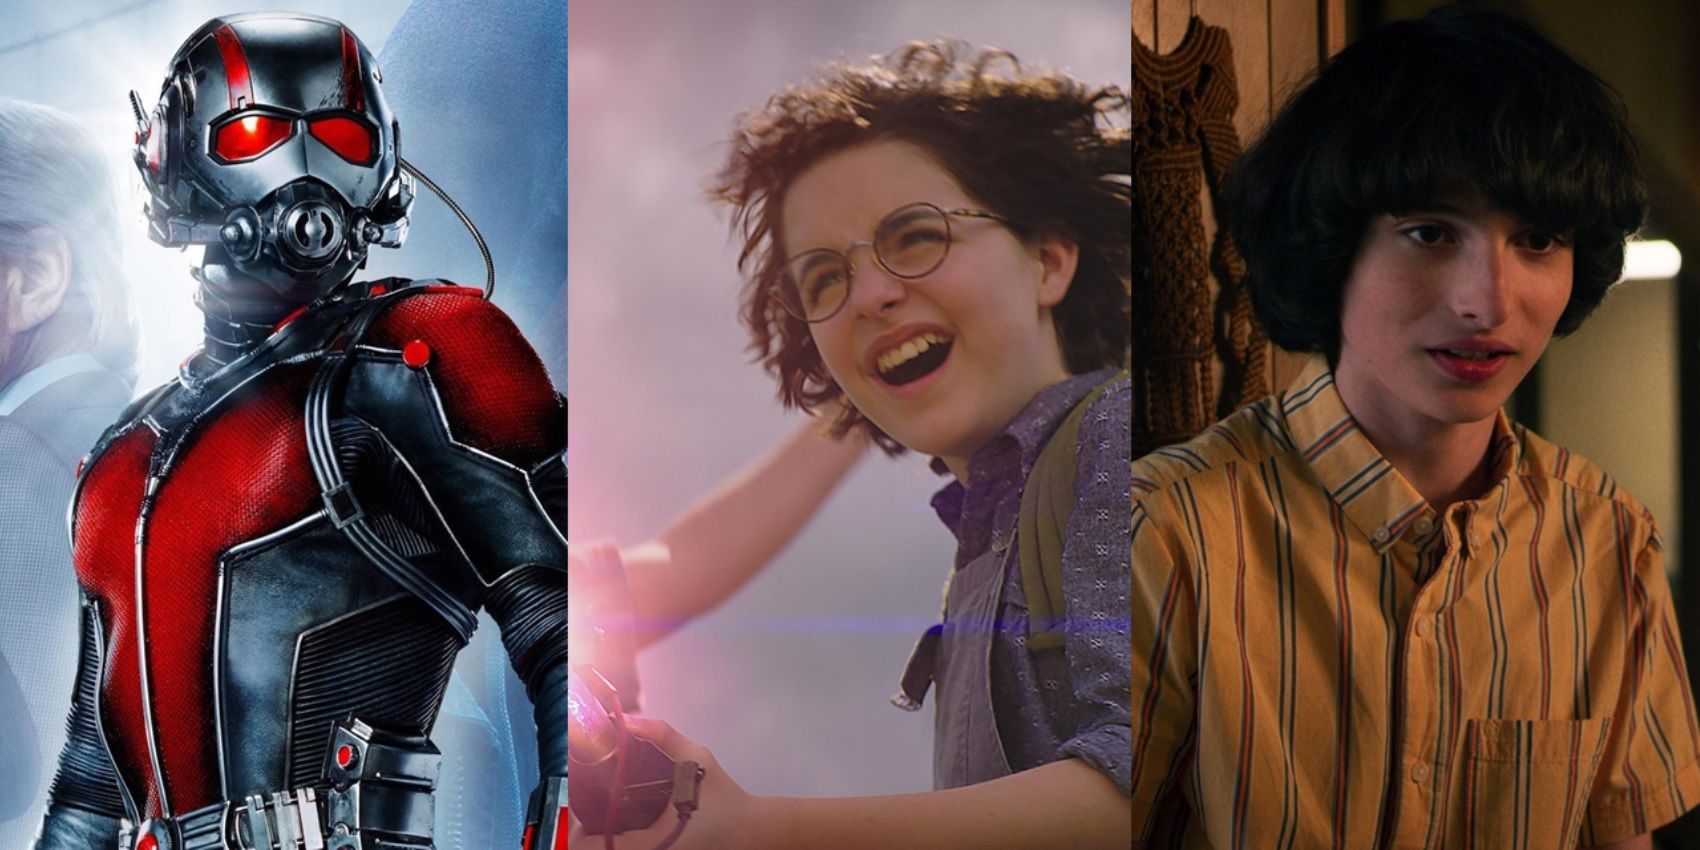 Split image of Paul Rudd in Ant-Man, Mckenna Grace in Ghostbusters Afterlife, and Finn Wolfhard in Stranger Things